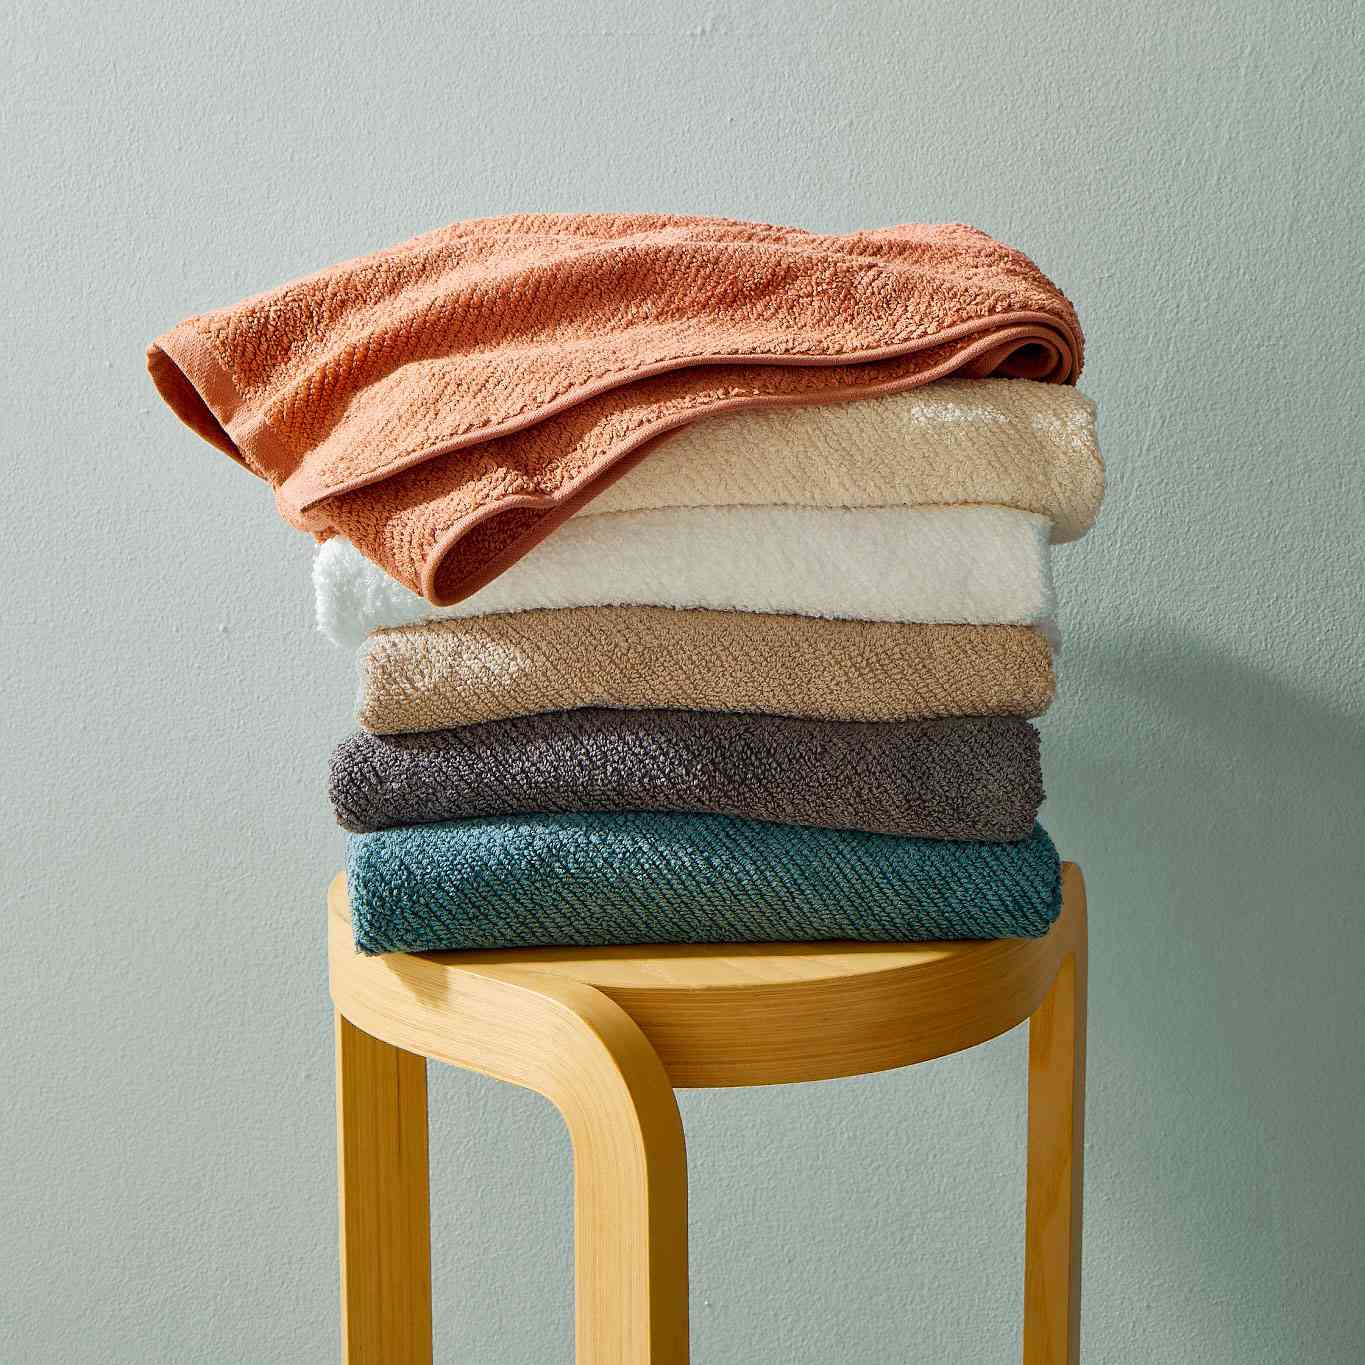 How to Pick the Best Bath Towels | Real Simple